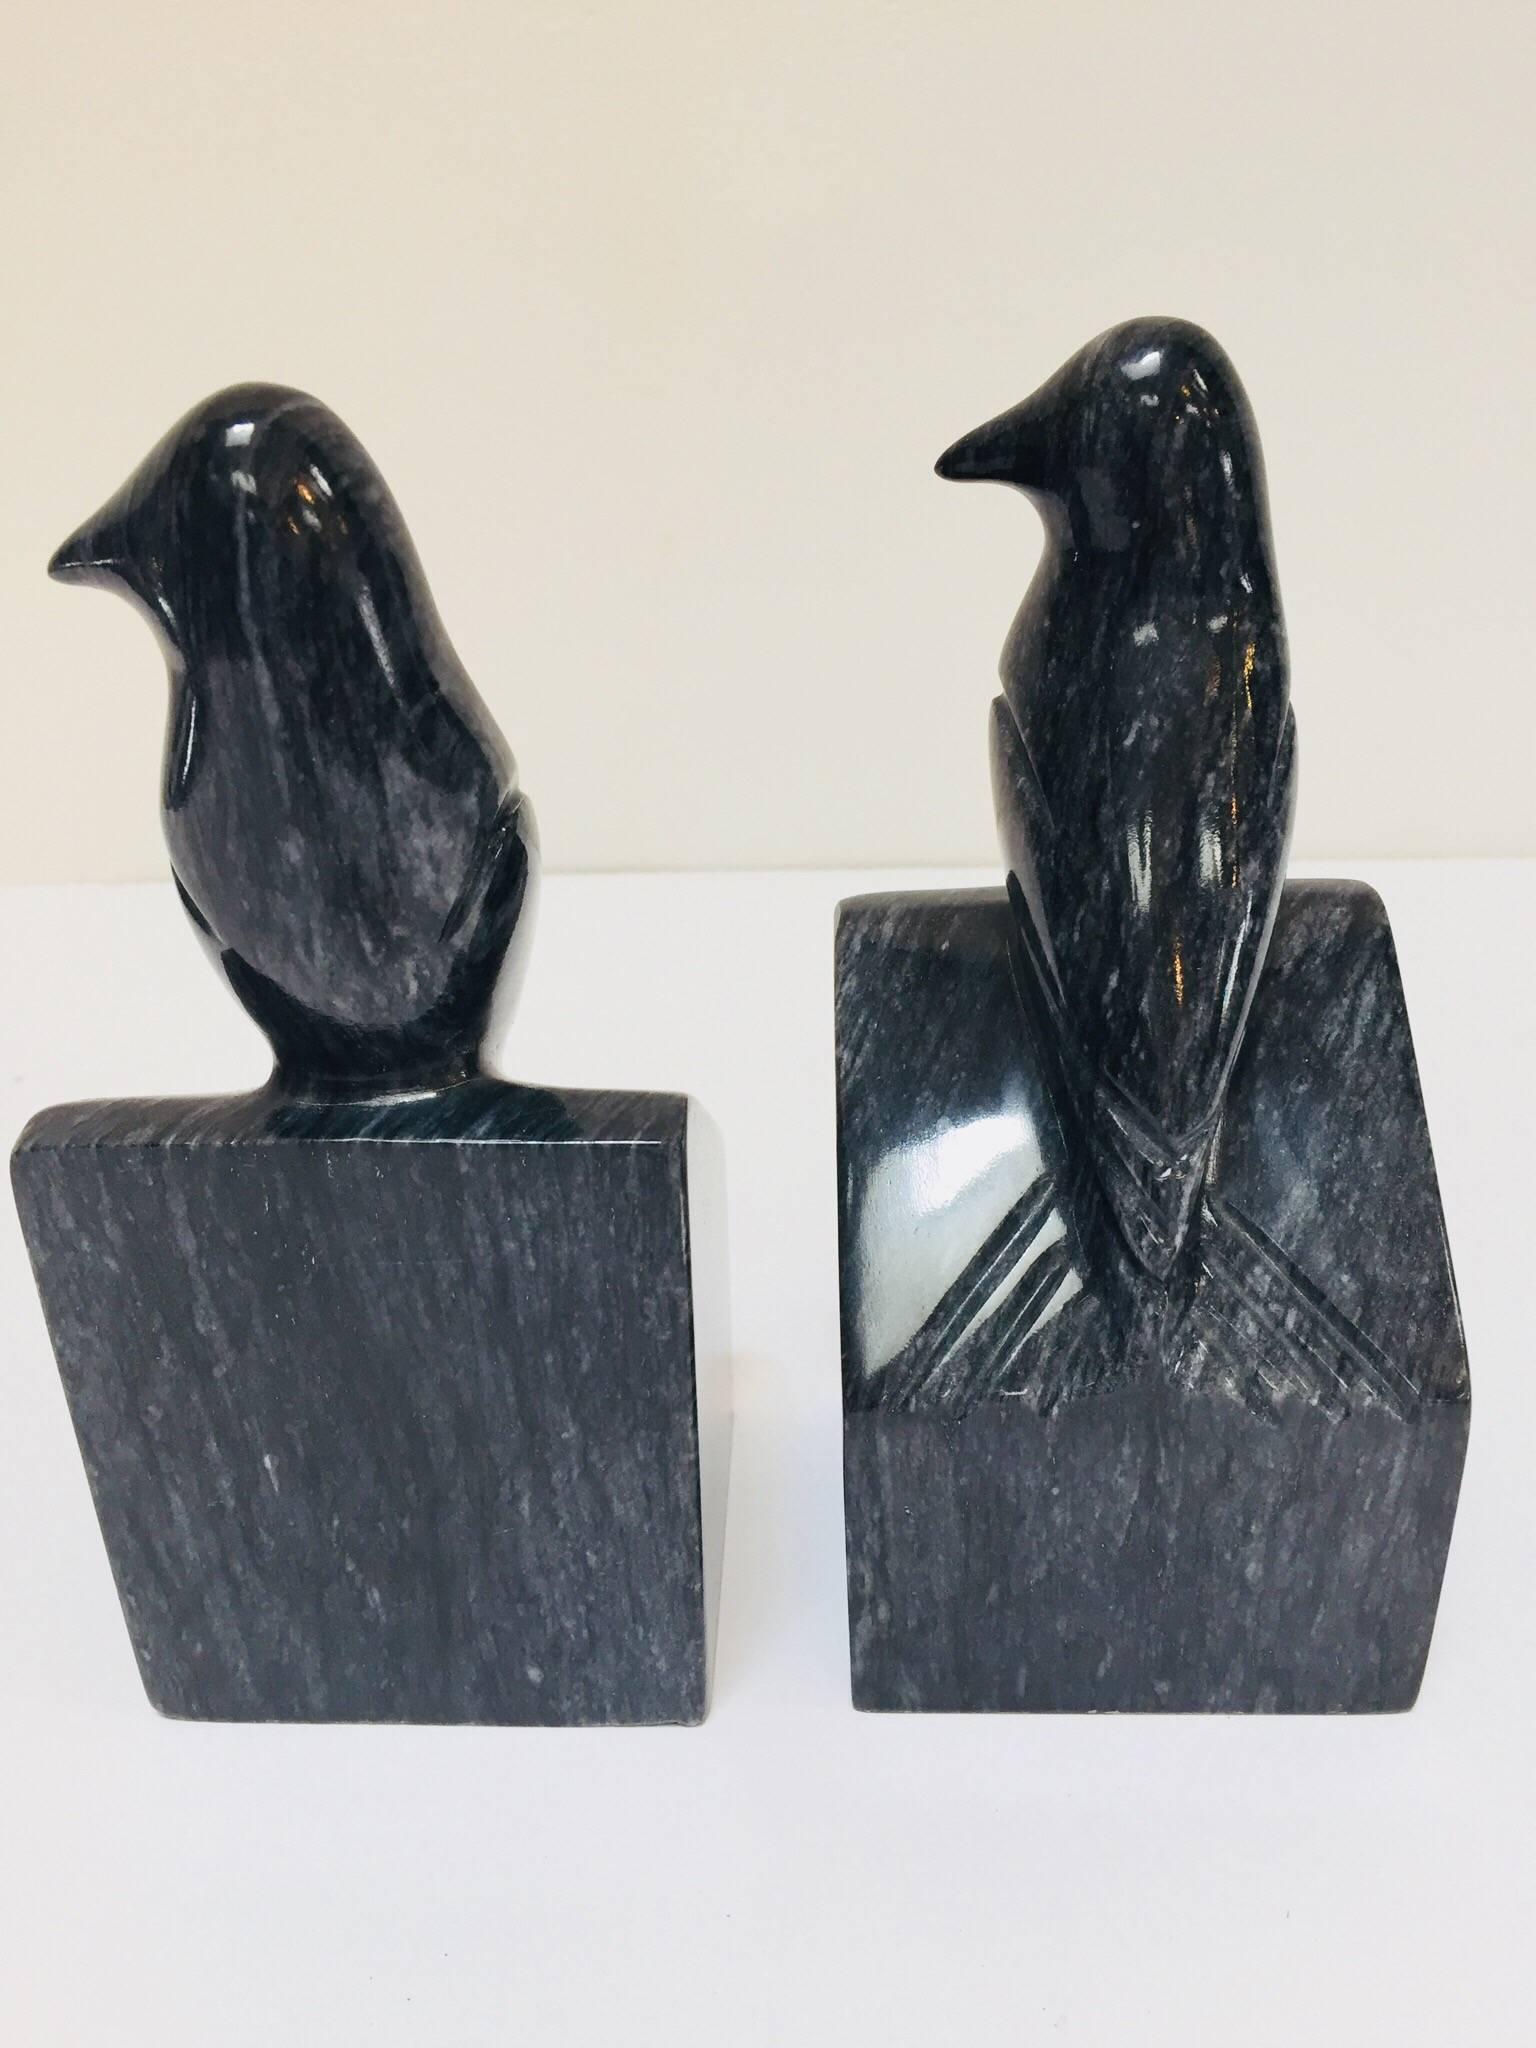 20th Century Pair of Modernist Art Deco Black Marble Birds Bookends